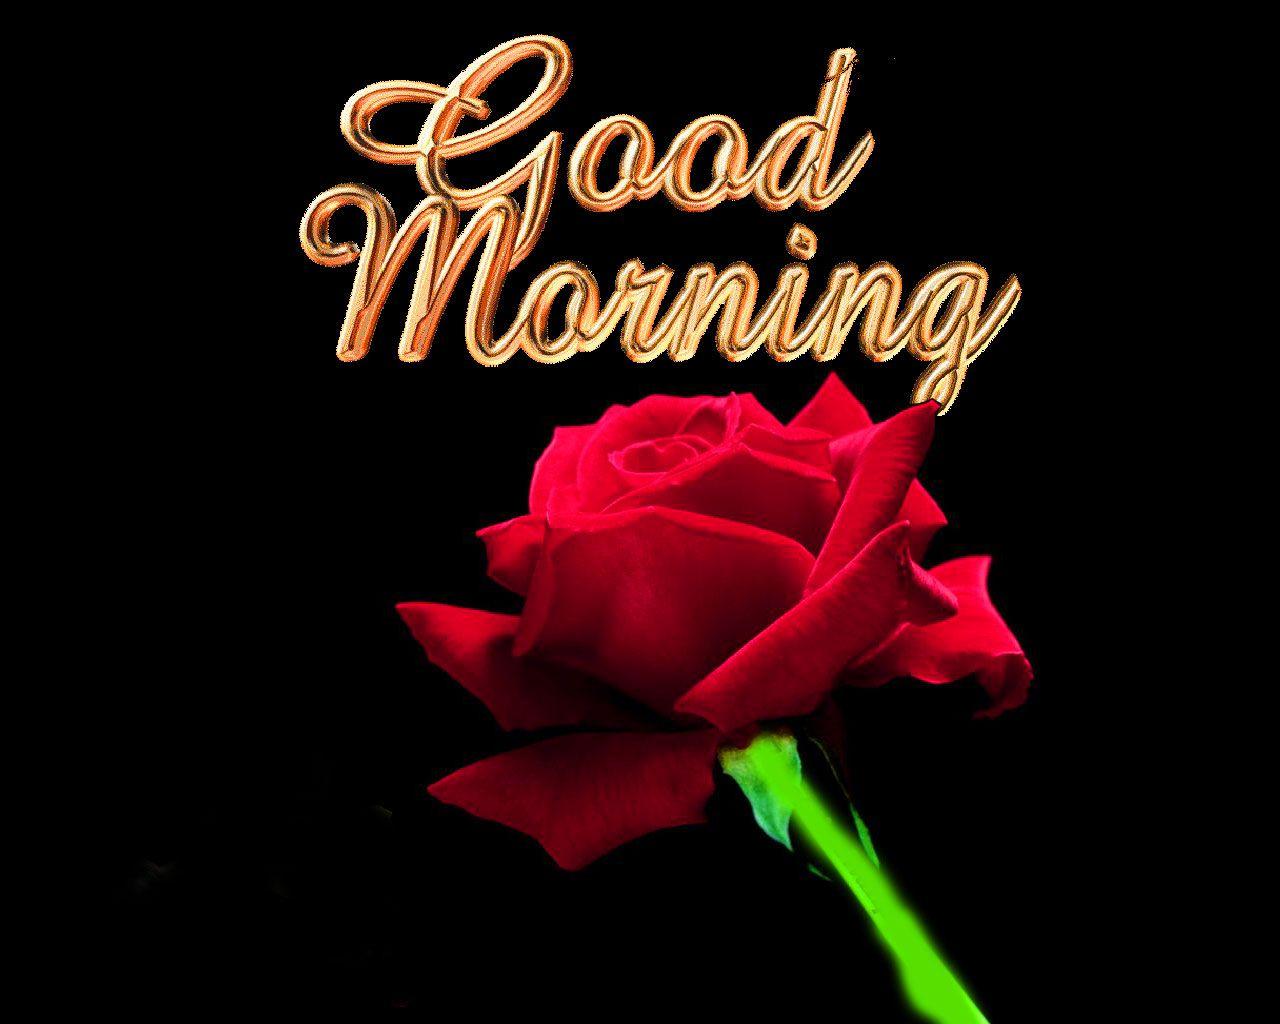 Good Morning 3D Wallpaper Image Photo Picture Download